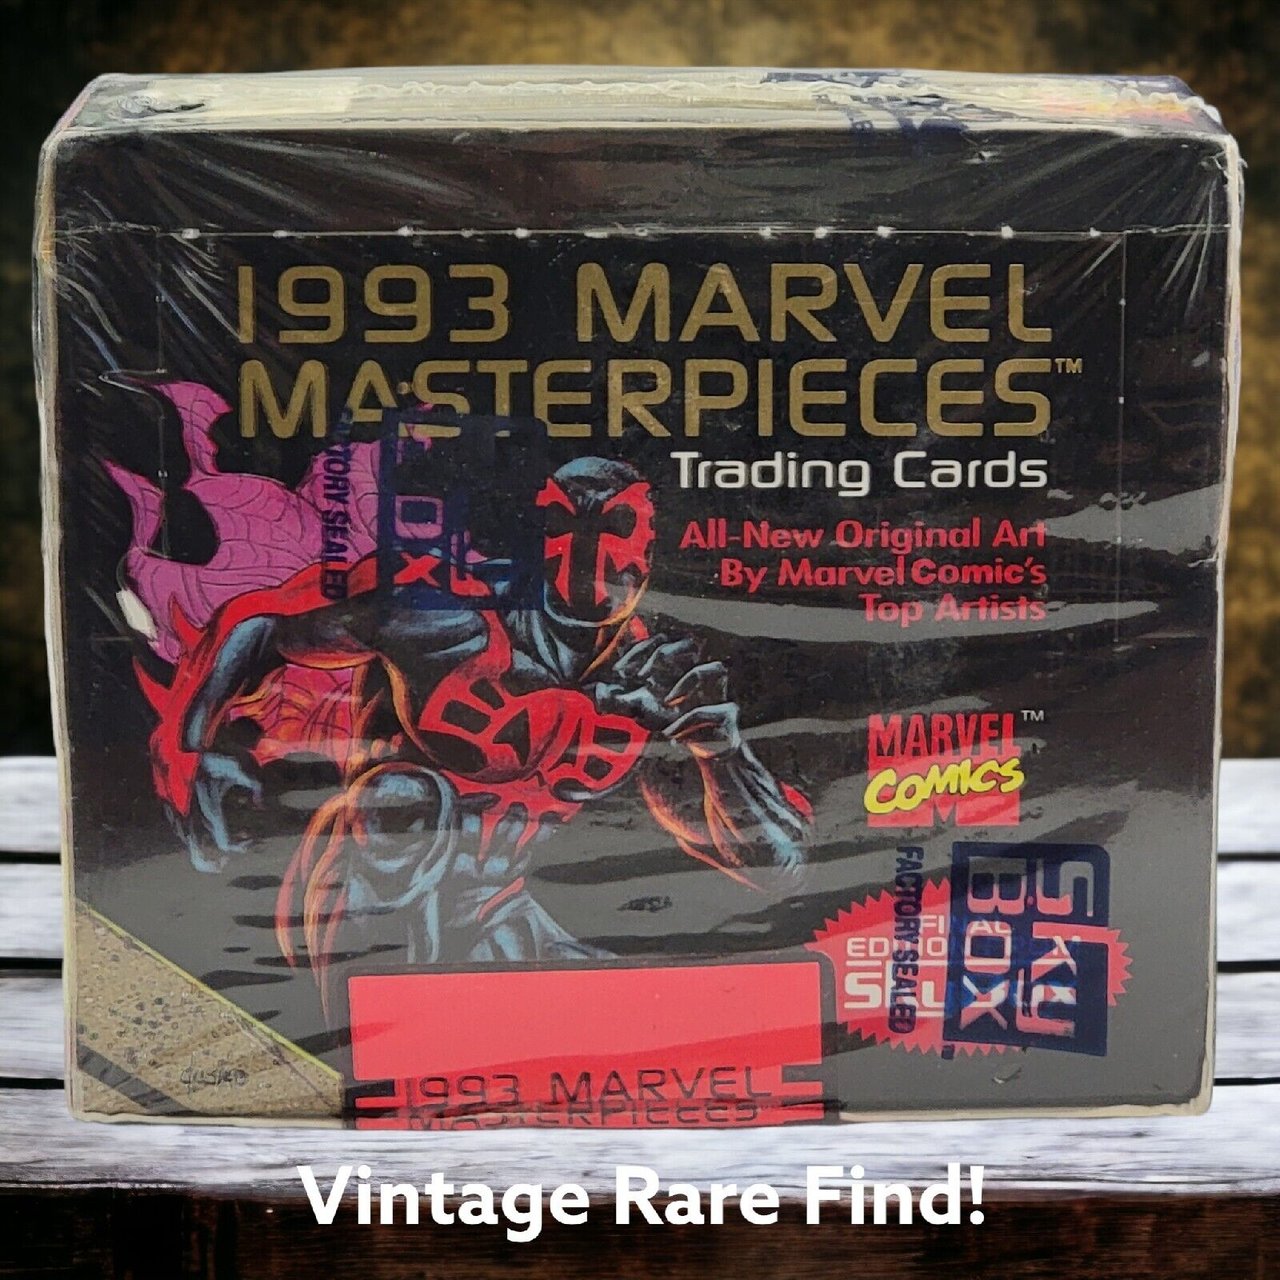 1993 marvel masterpieces trading cards